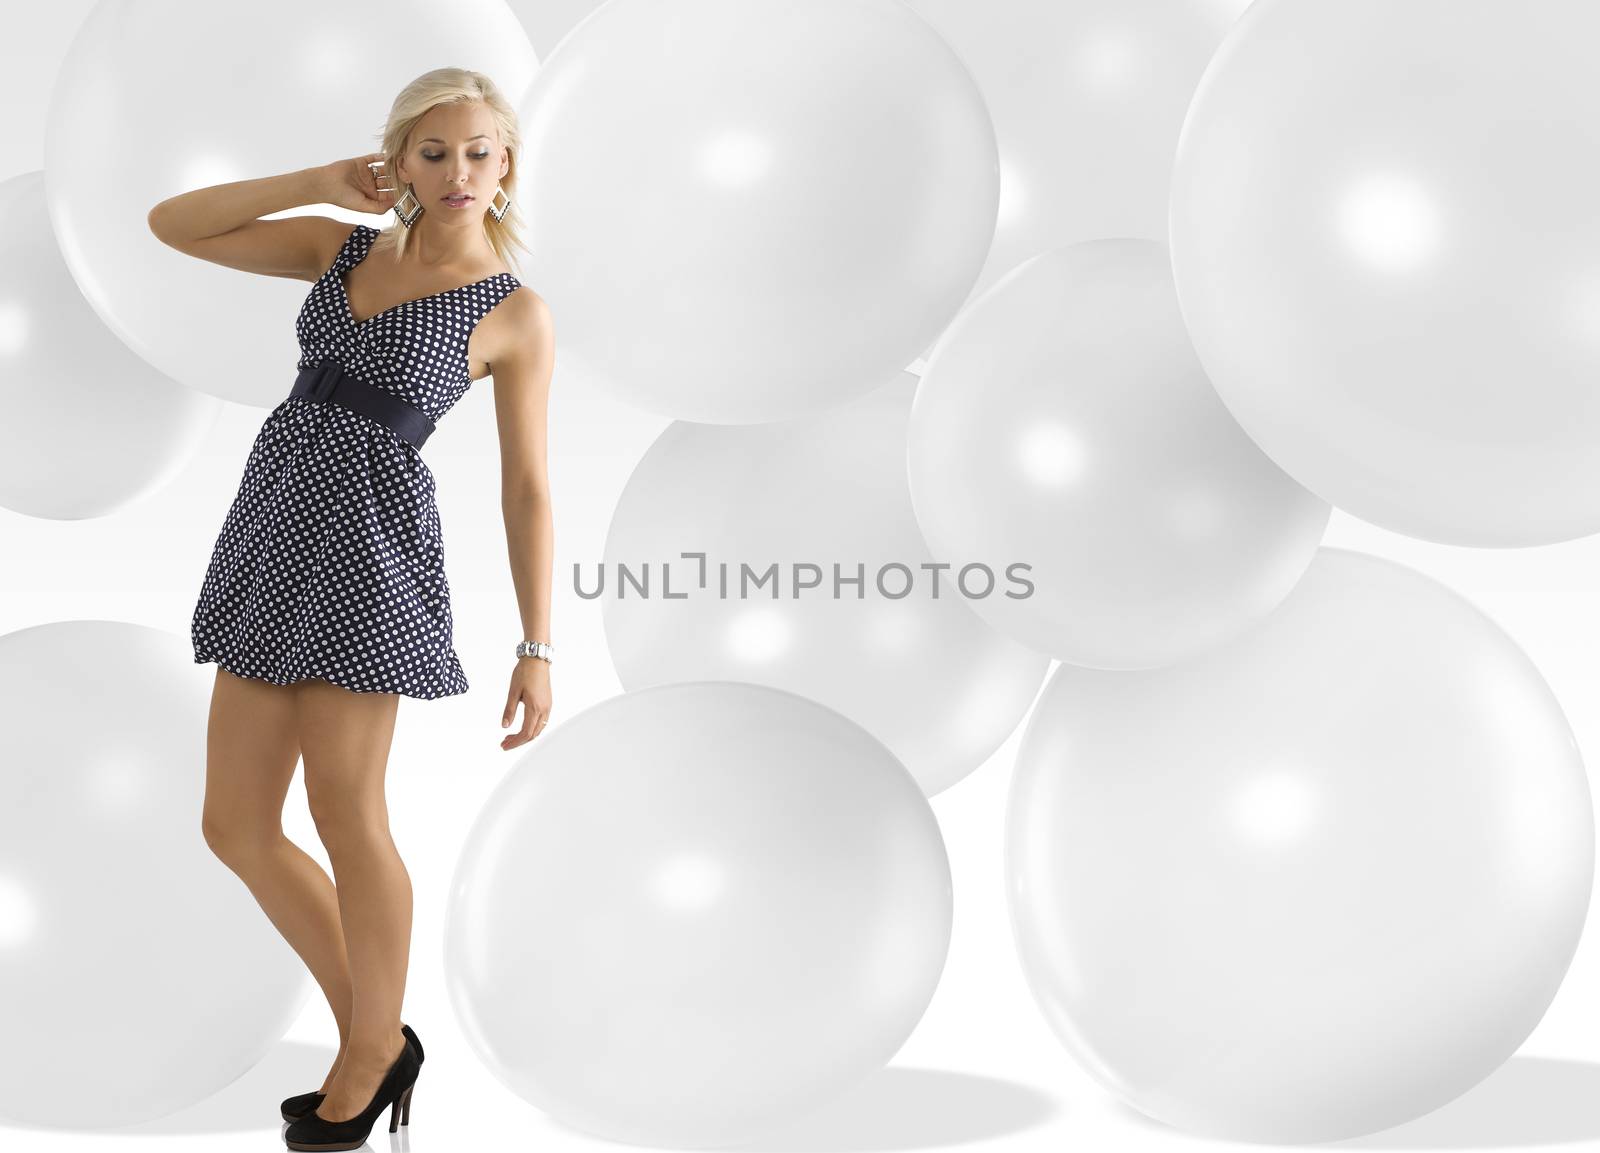 blond young woman wearing blue polka dot dress jewellery and taking pose